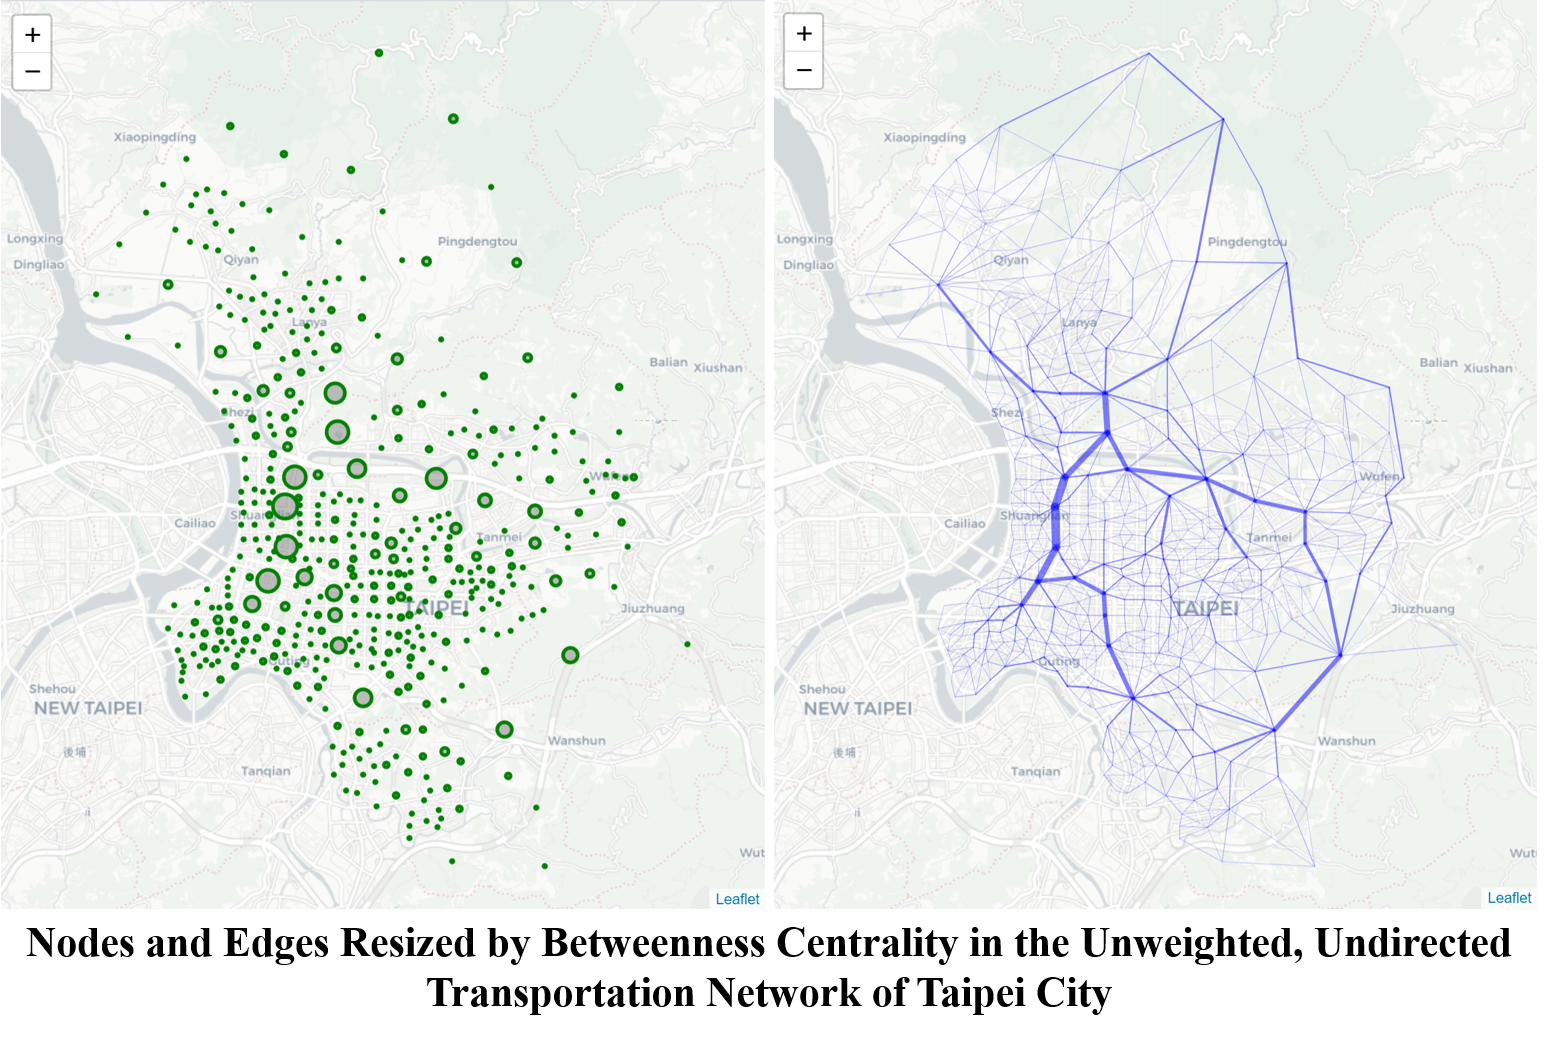 3_1_Nodes_and_Edges_Resized_by_Betweenness_Centrality_in_the_Unweighted_Undirected_Transportation_Network